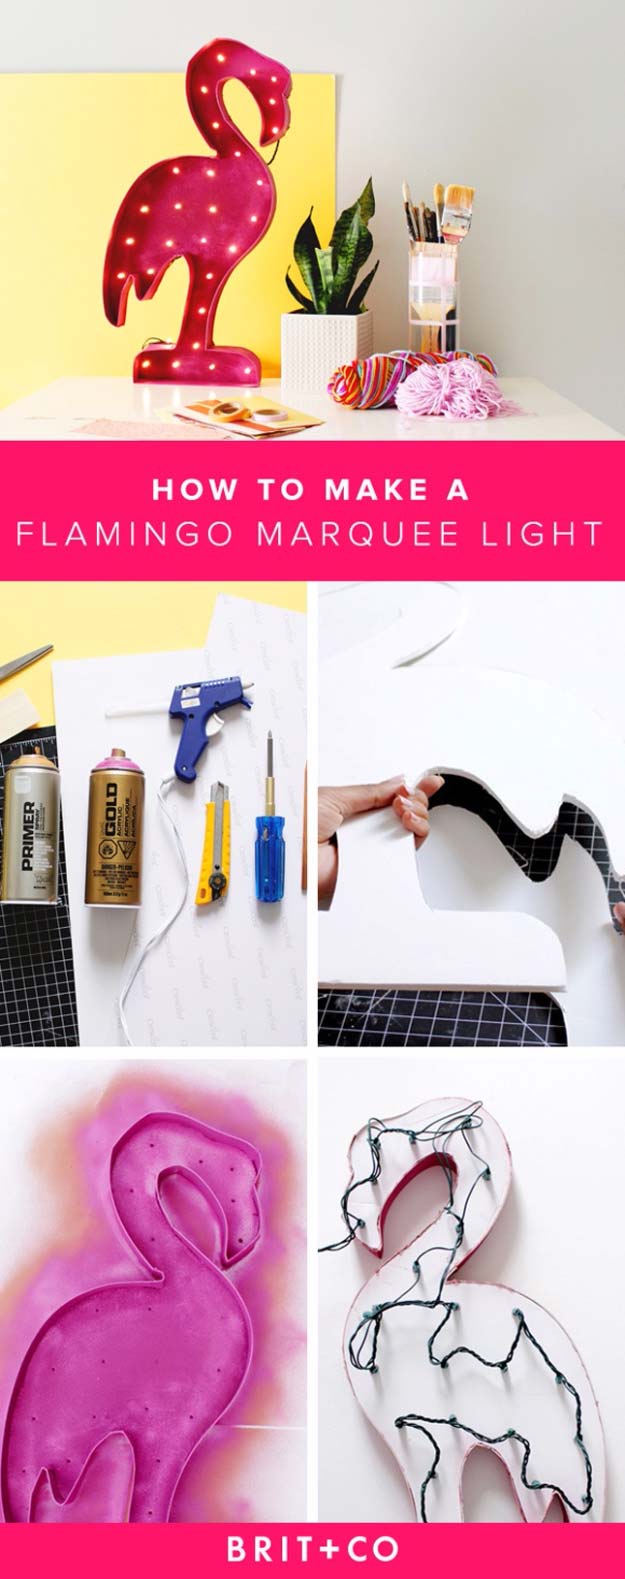 Cool Ways To Use Christmas Lights - Flamingo Marquee Light - Best Easy DIY Ideas for String Lights for Room Decoration, Home Decor and Creative DIY Bedroom Lighting - Creative Christmas Light Tutorials with Step by Step Instructions - Creative Crafts and DIY Projects for Teens, Teenagers and Adults #diyideas #stringlights #diydecor #teencrafts